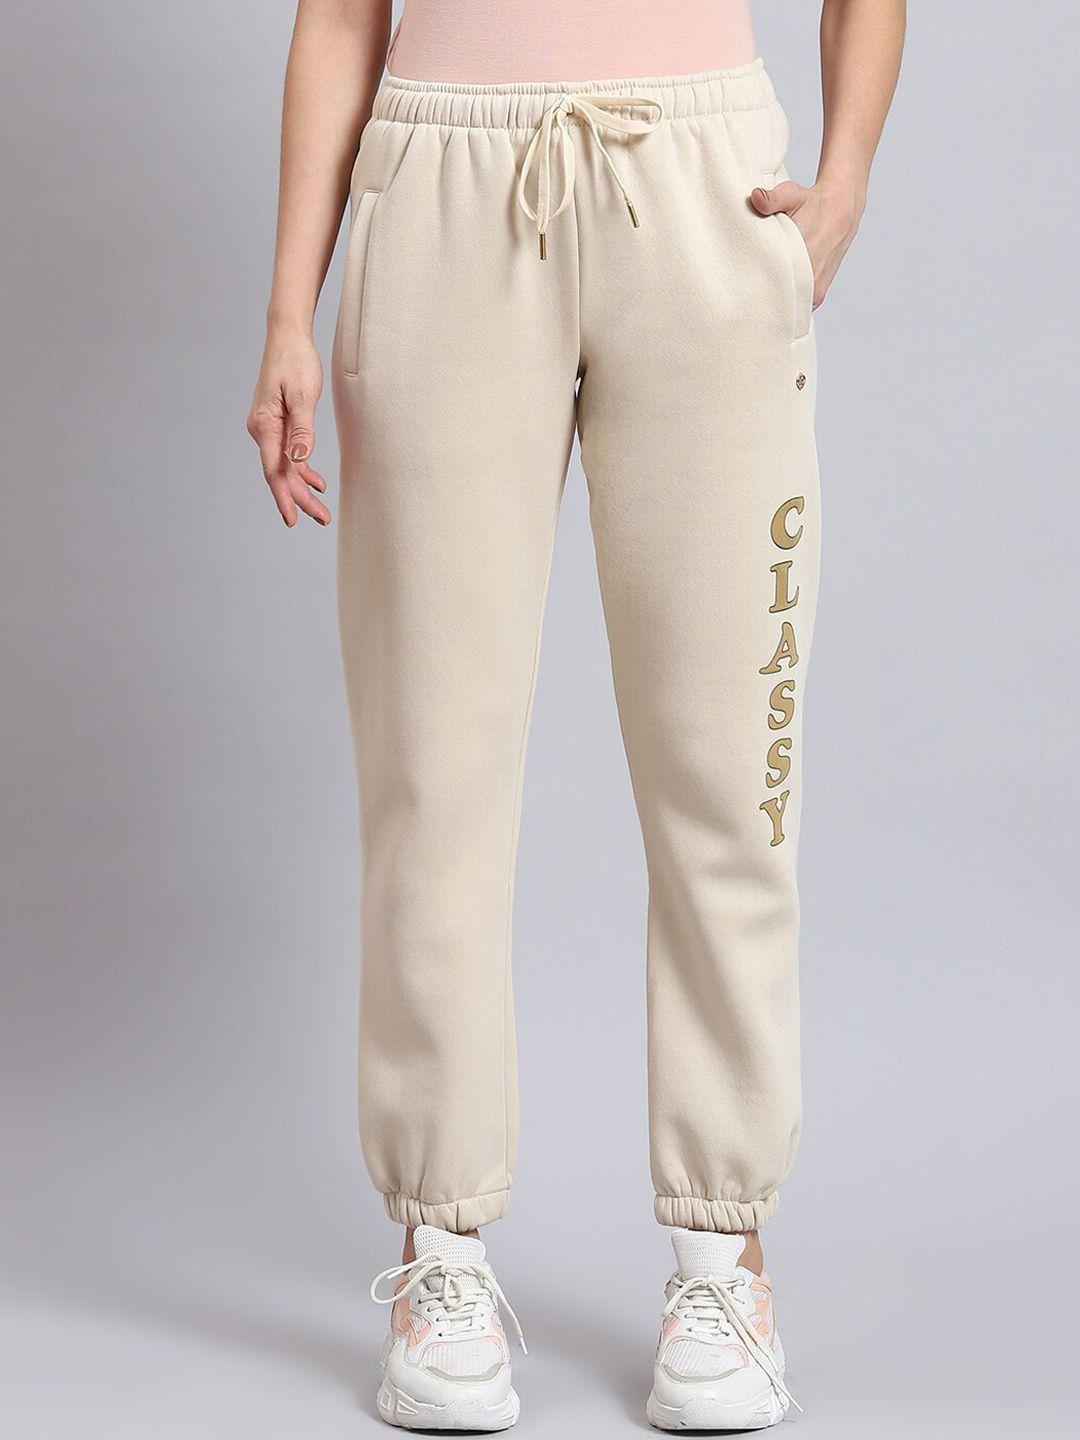 monte carlo women typography printed joggers